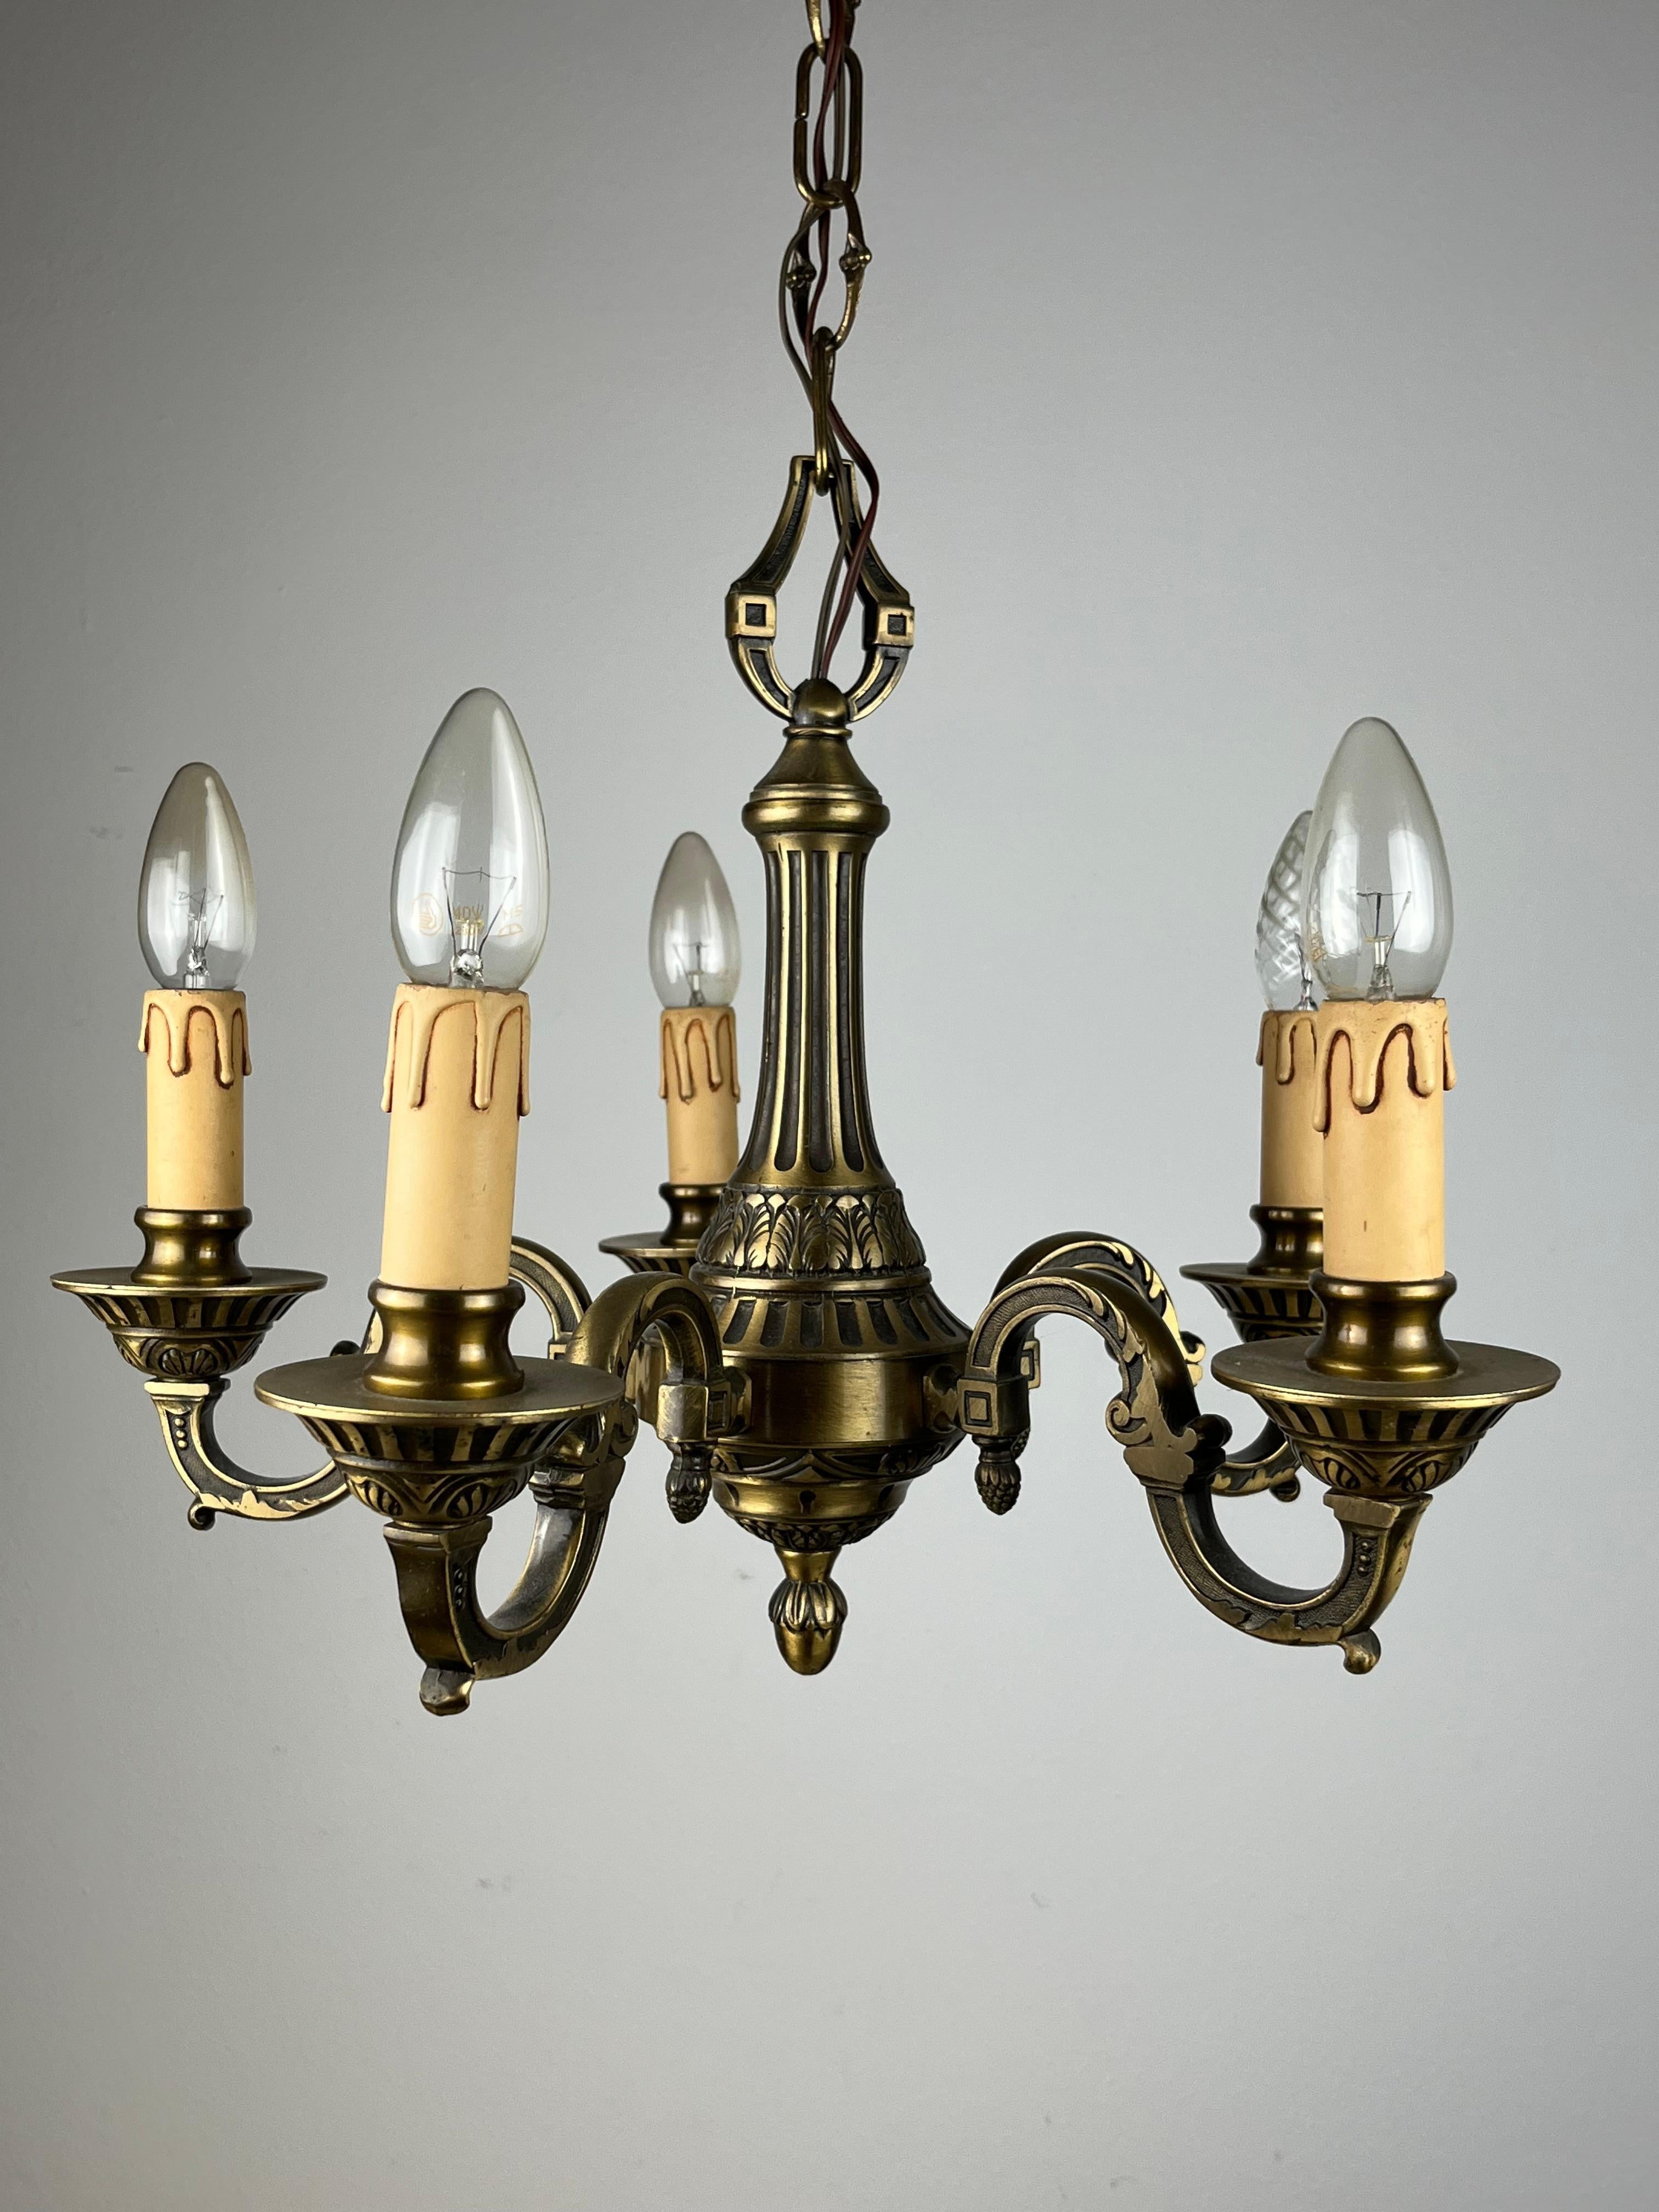 Brass chandelier with 5 lights, Italy, 1960s.
Small signs of the time.
Intact and functioning.